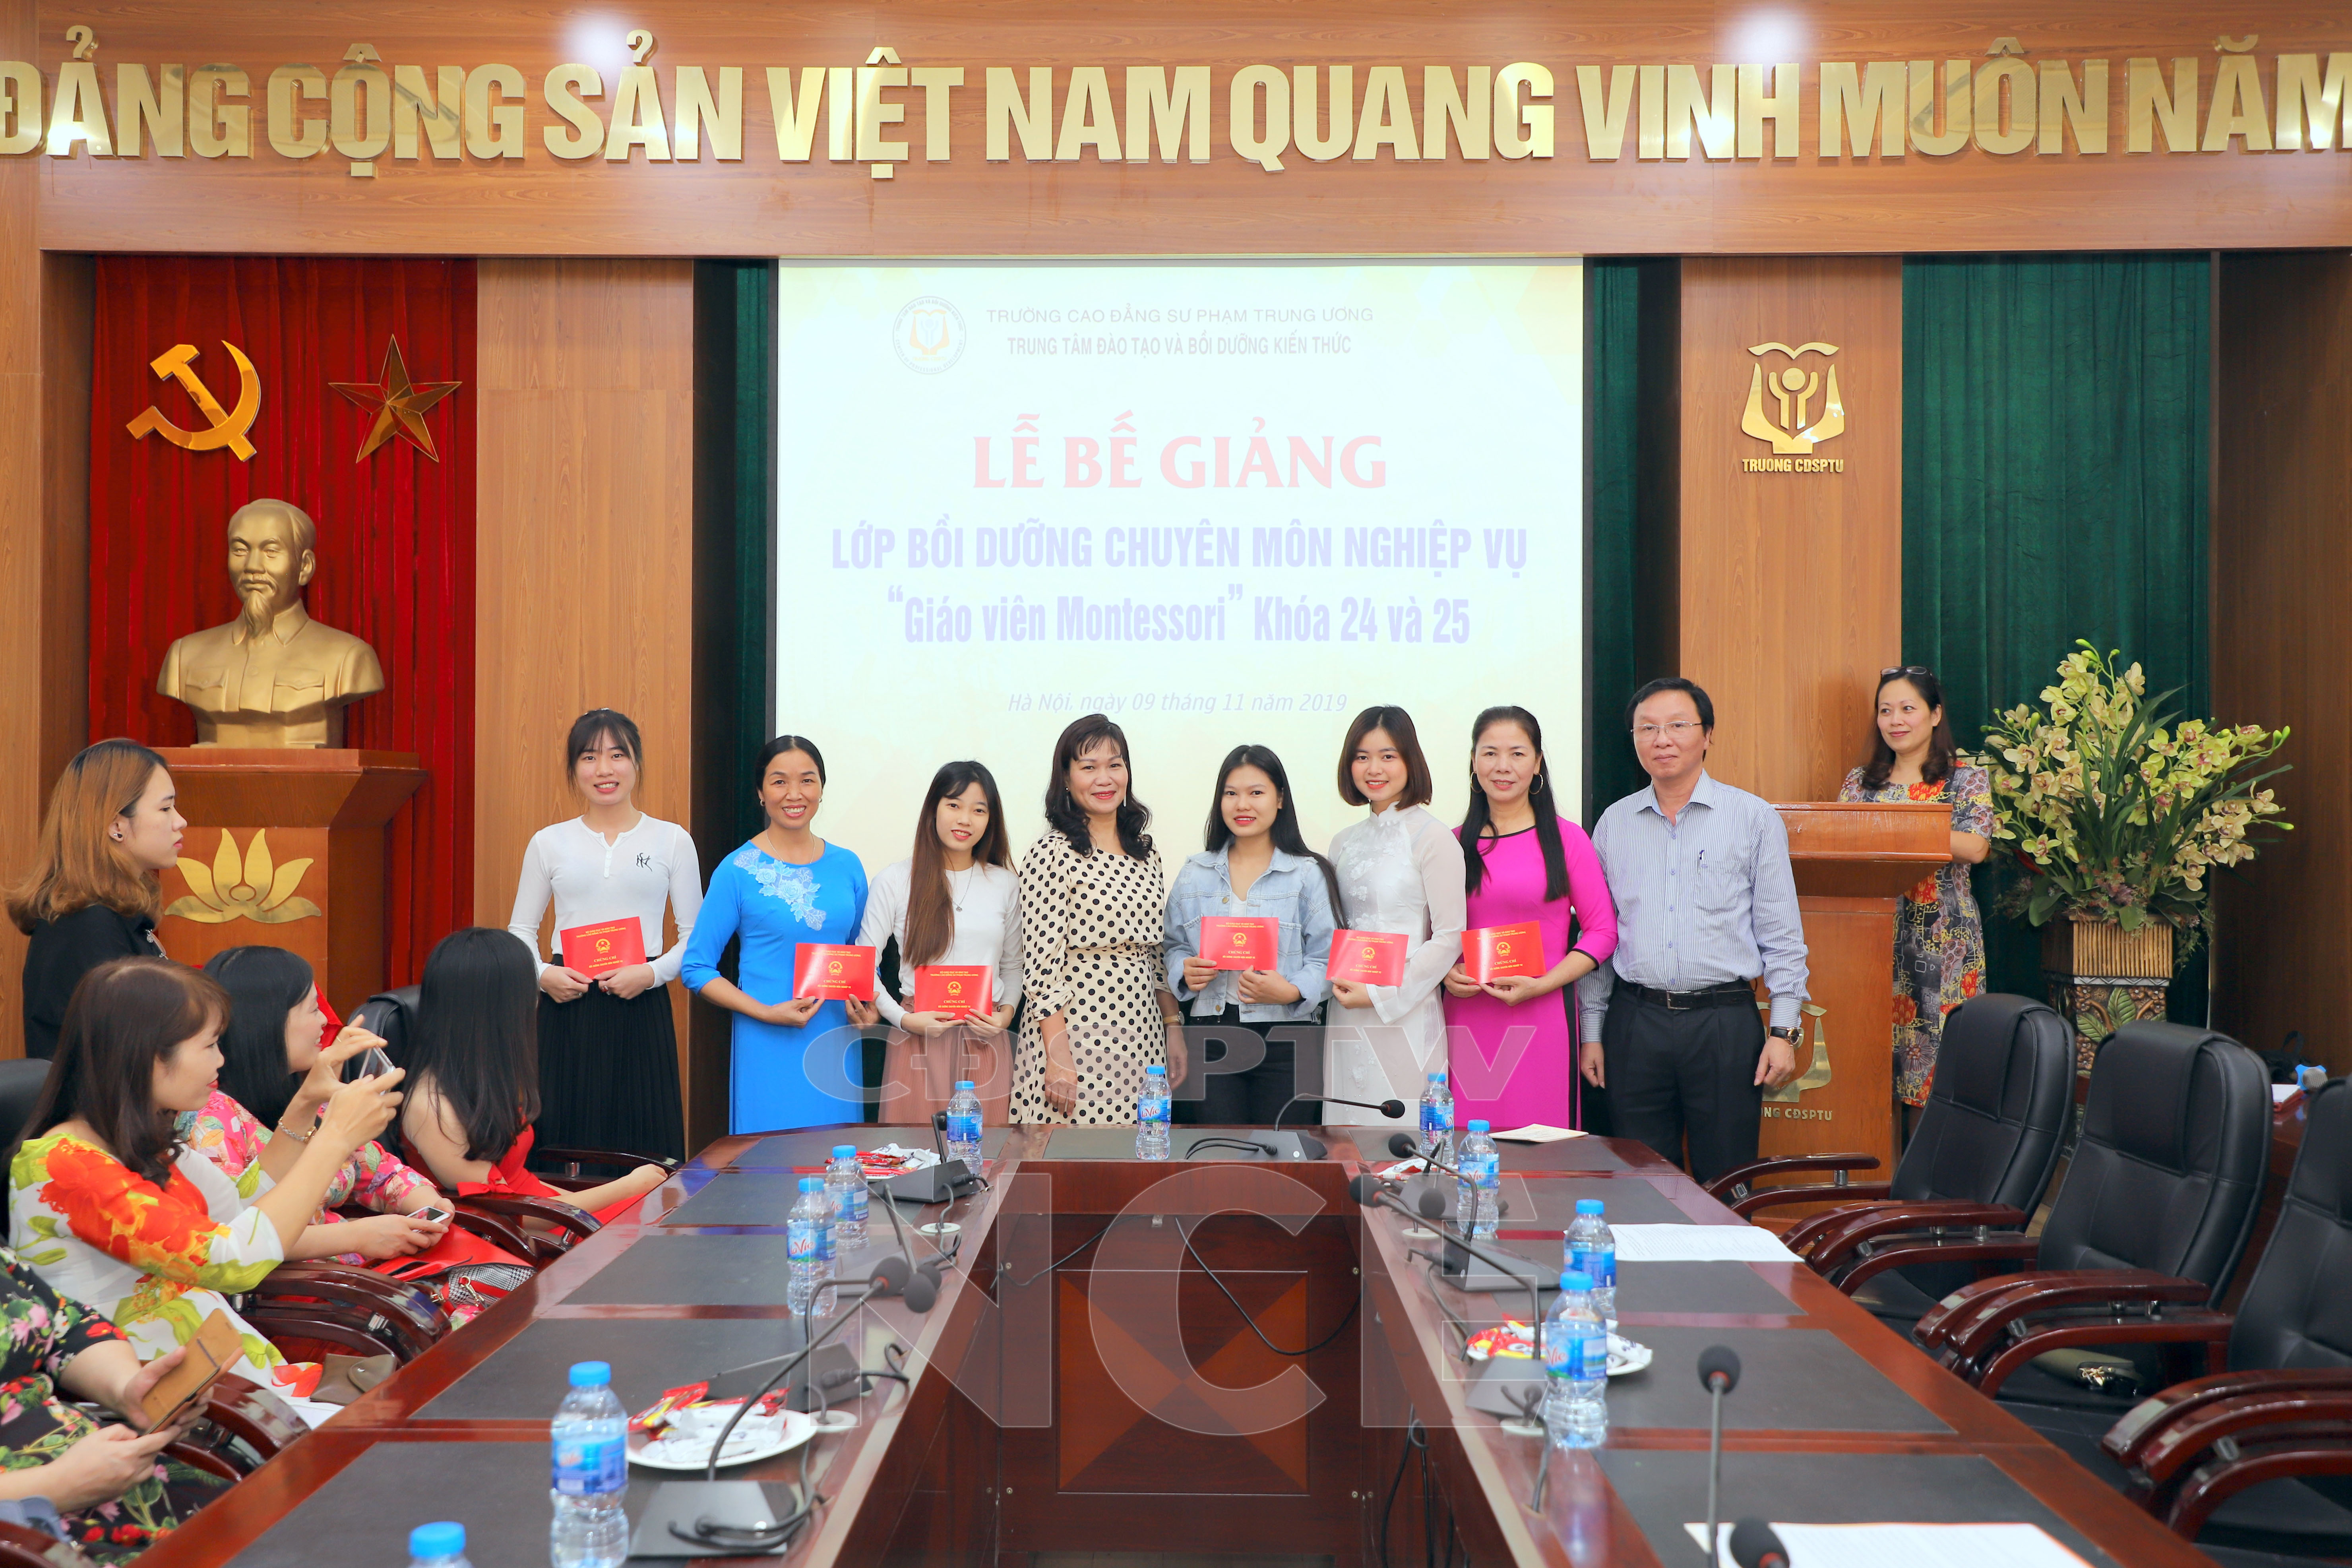 le be giang chung chi montessori cdsptw 1